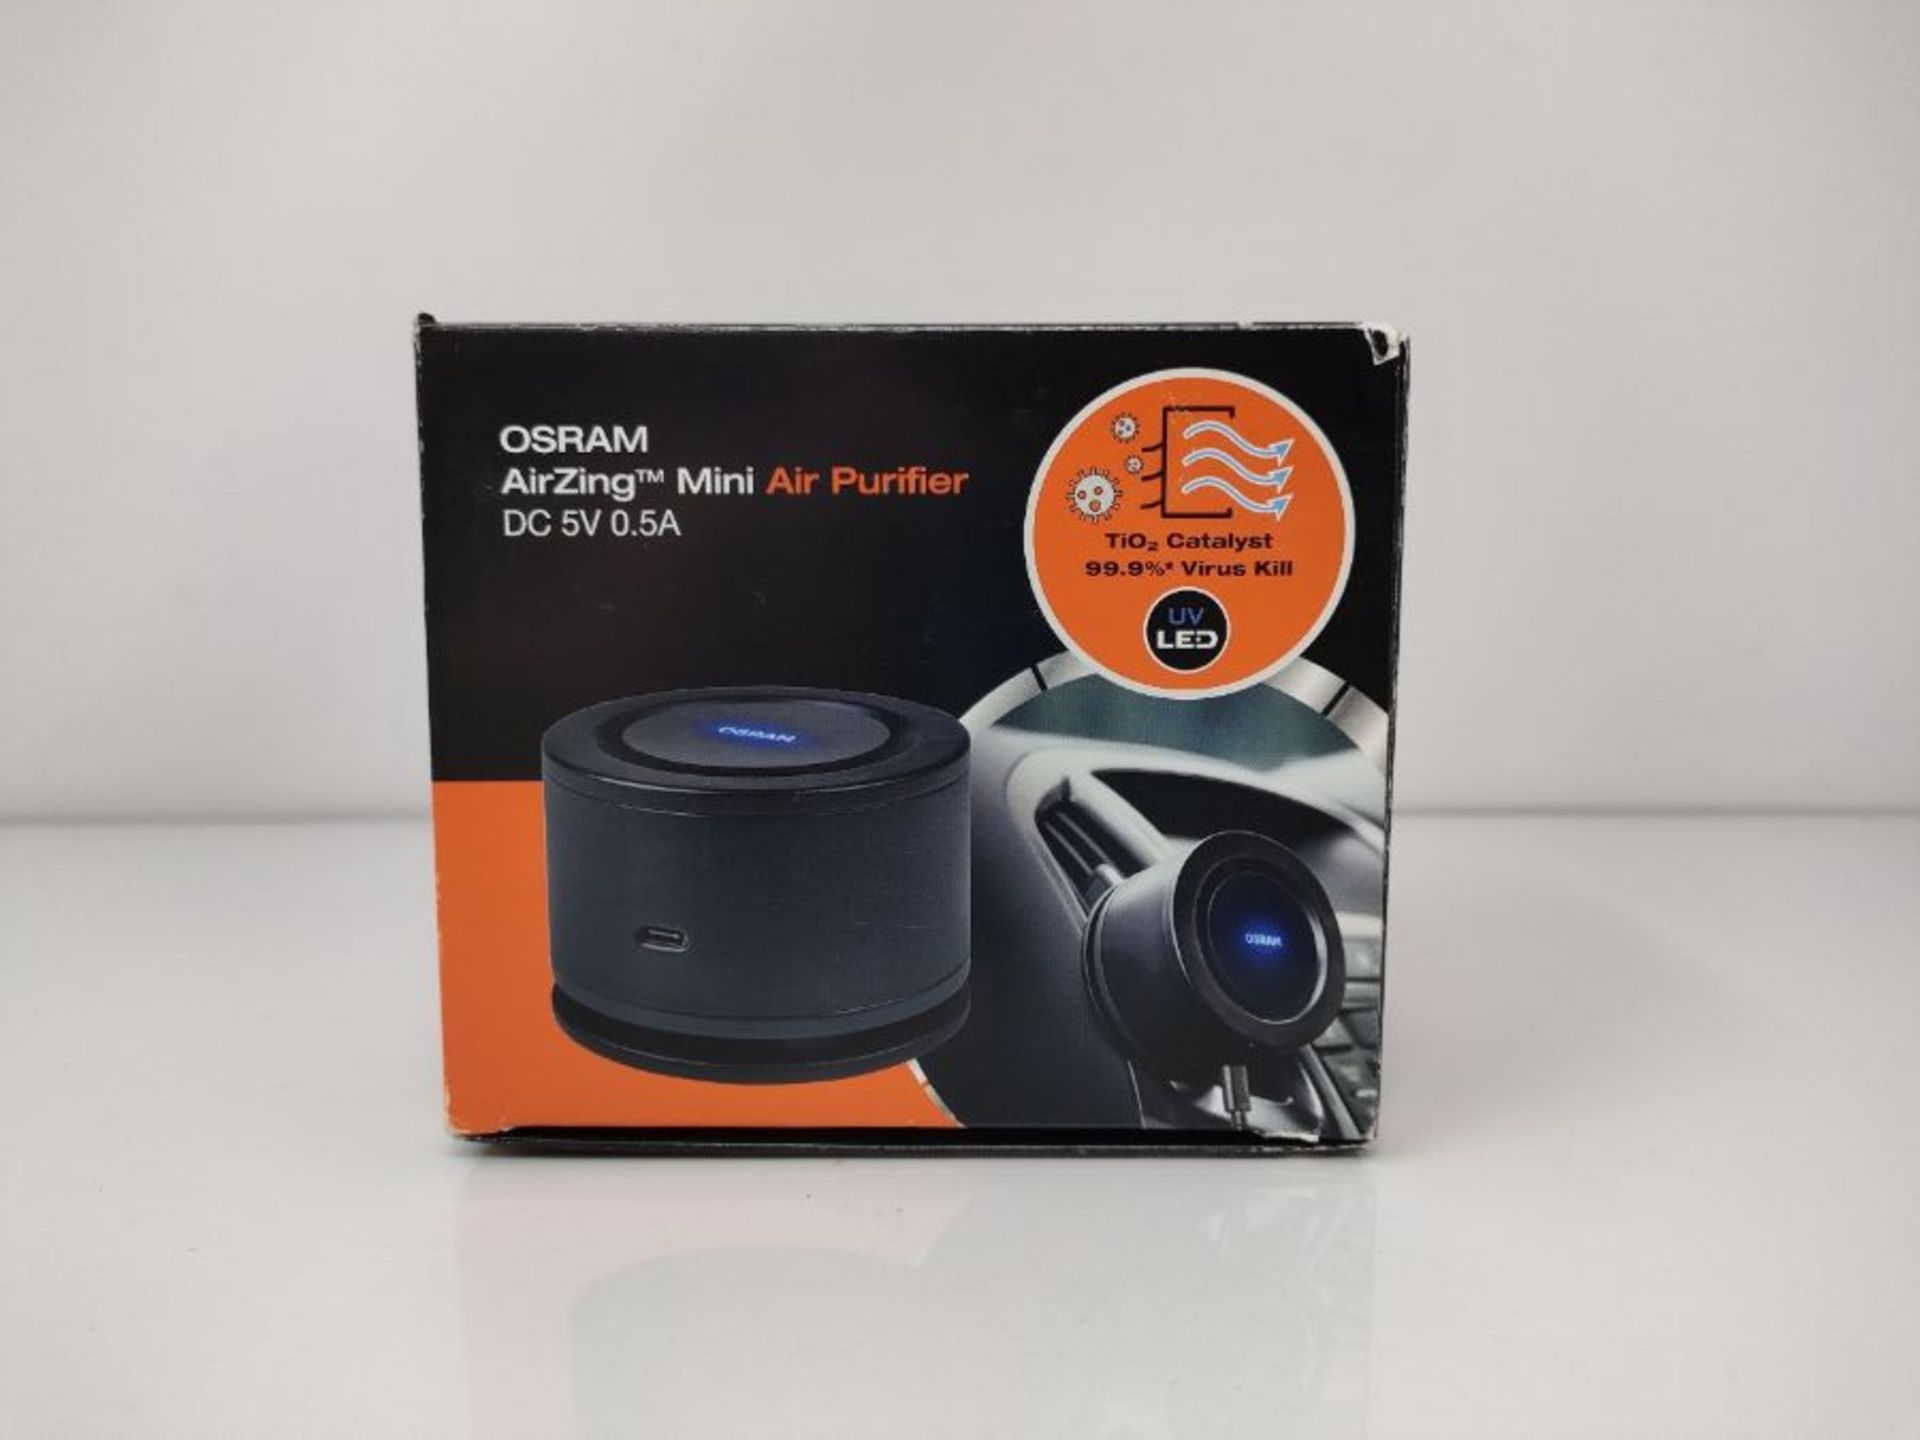 OSRAM AirZing Mini Air Purifier; Car air purifier with USB port, destroys viruses and - Image 2 of 3